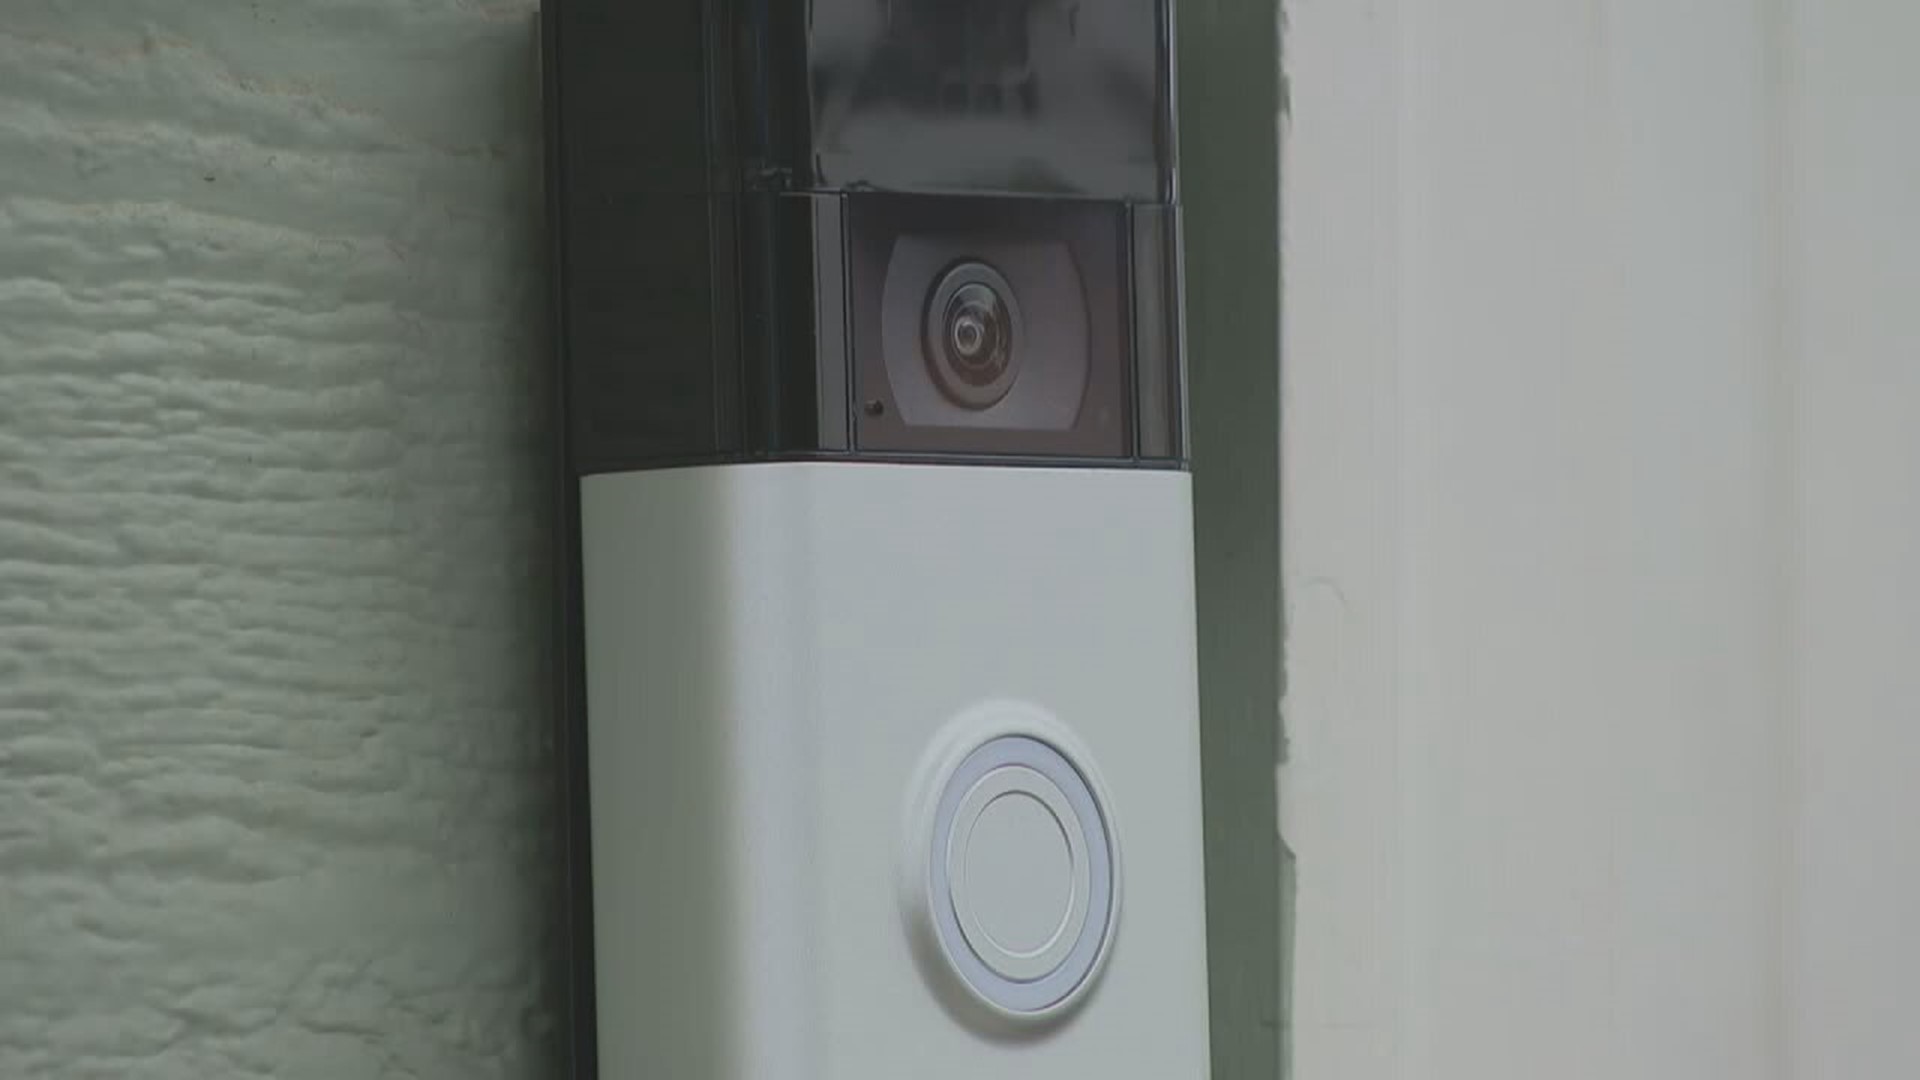 Ring doorbell cameras gave every employee 'full access' to all customer  video for years: FTC - 6abc Philadelphia